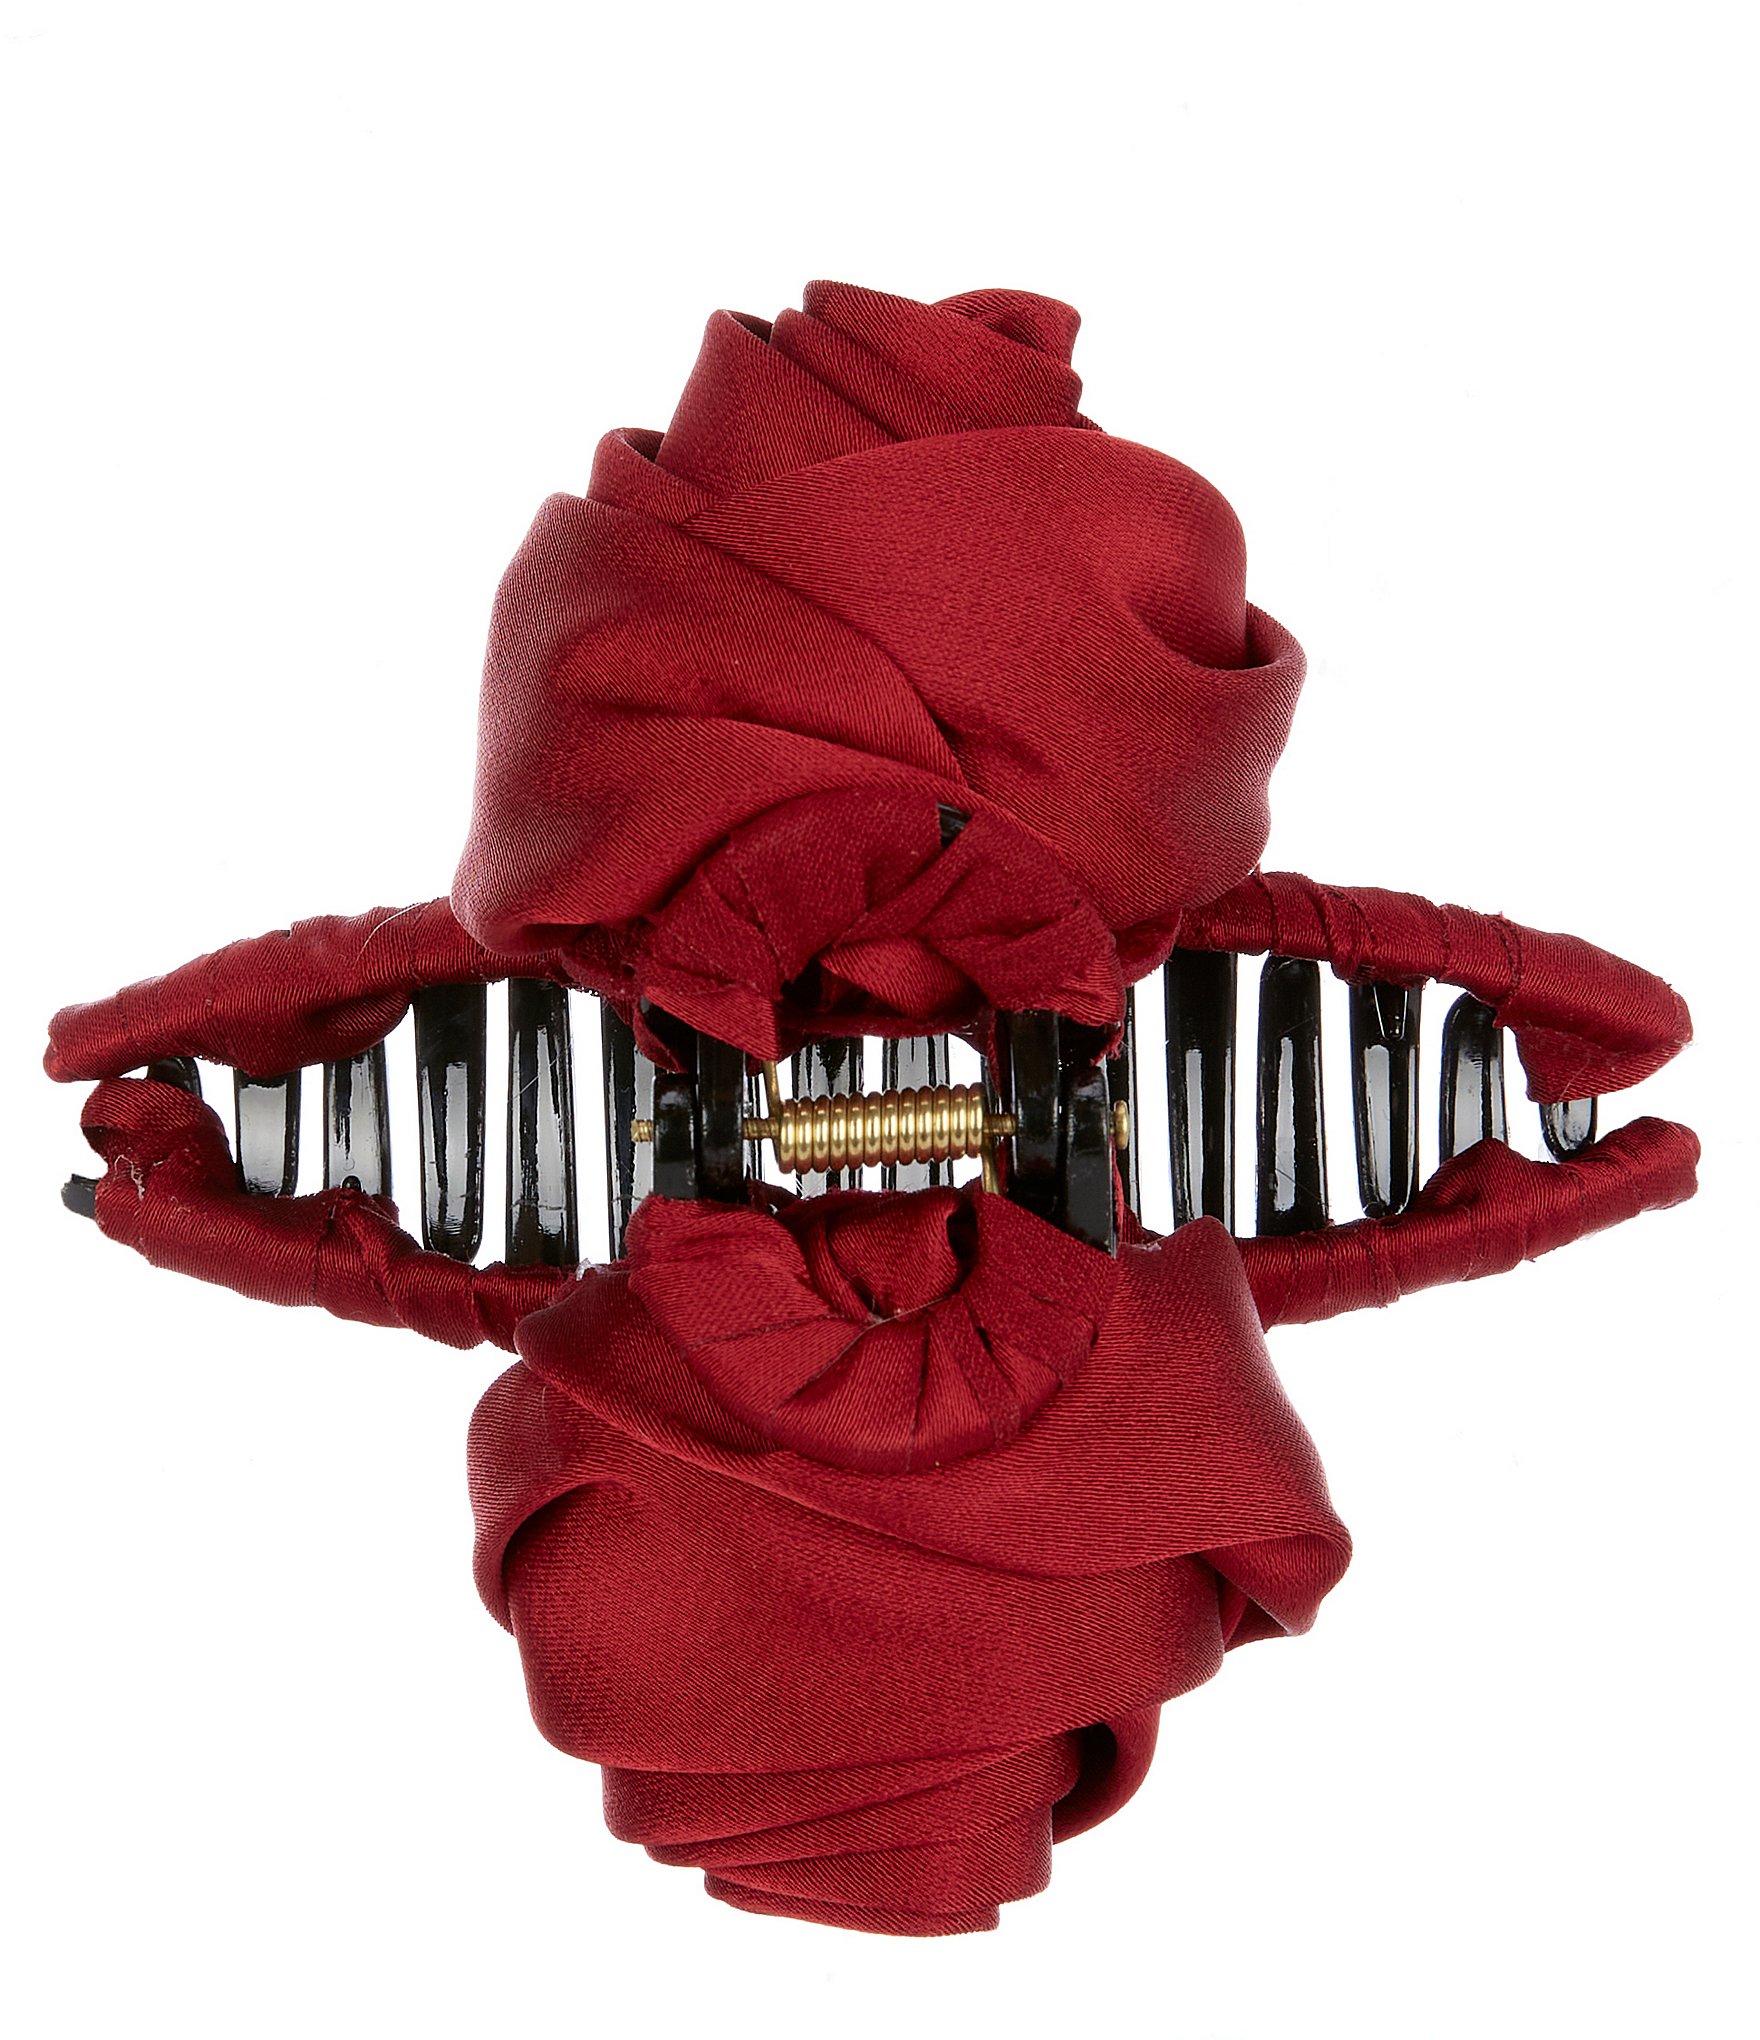 Jersey Solid Bow Headband - Red